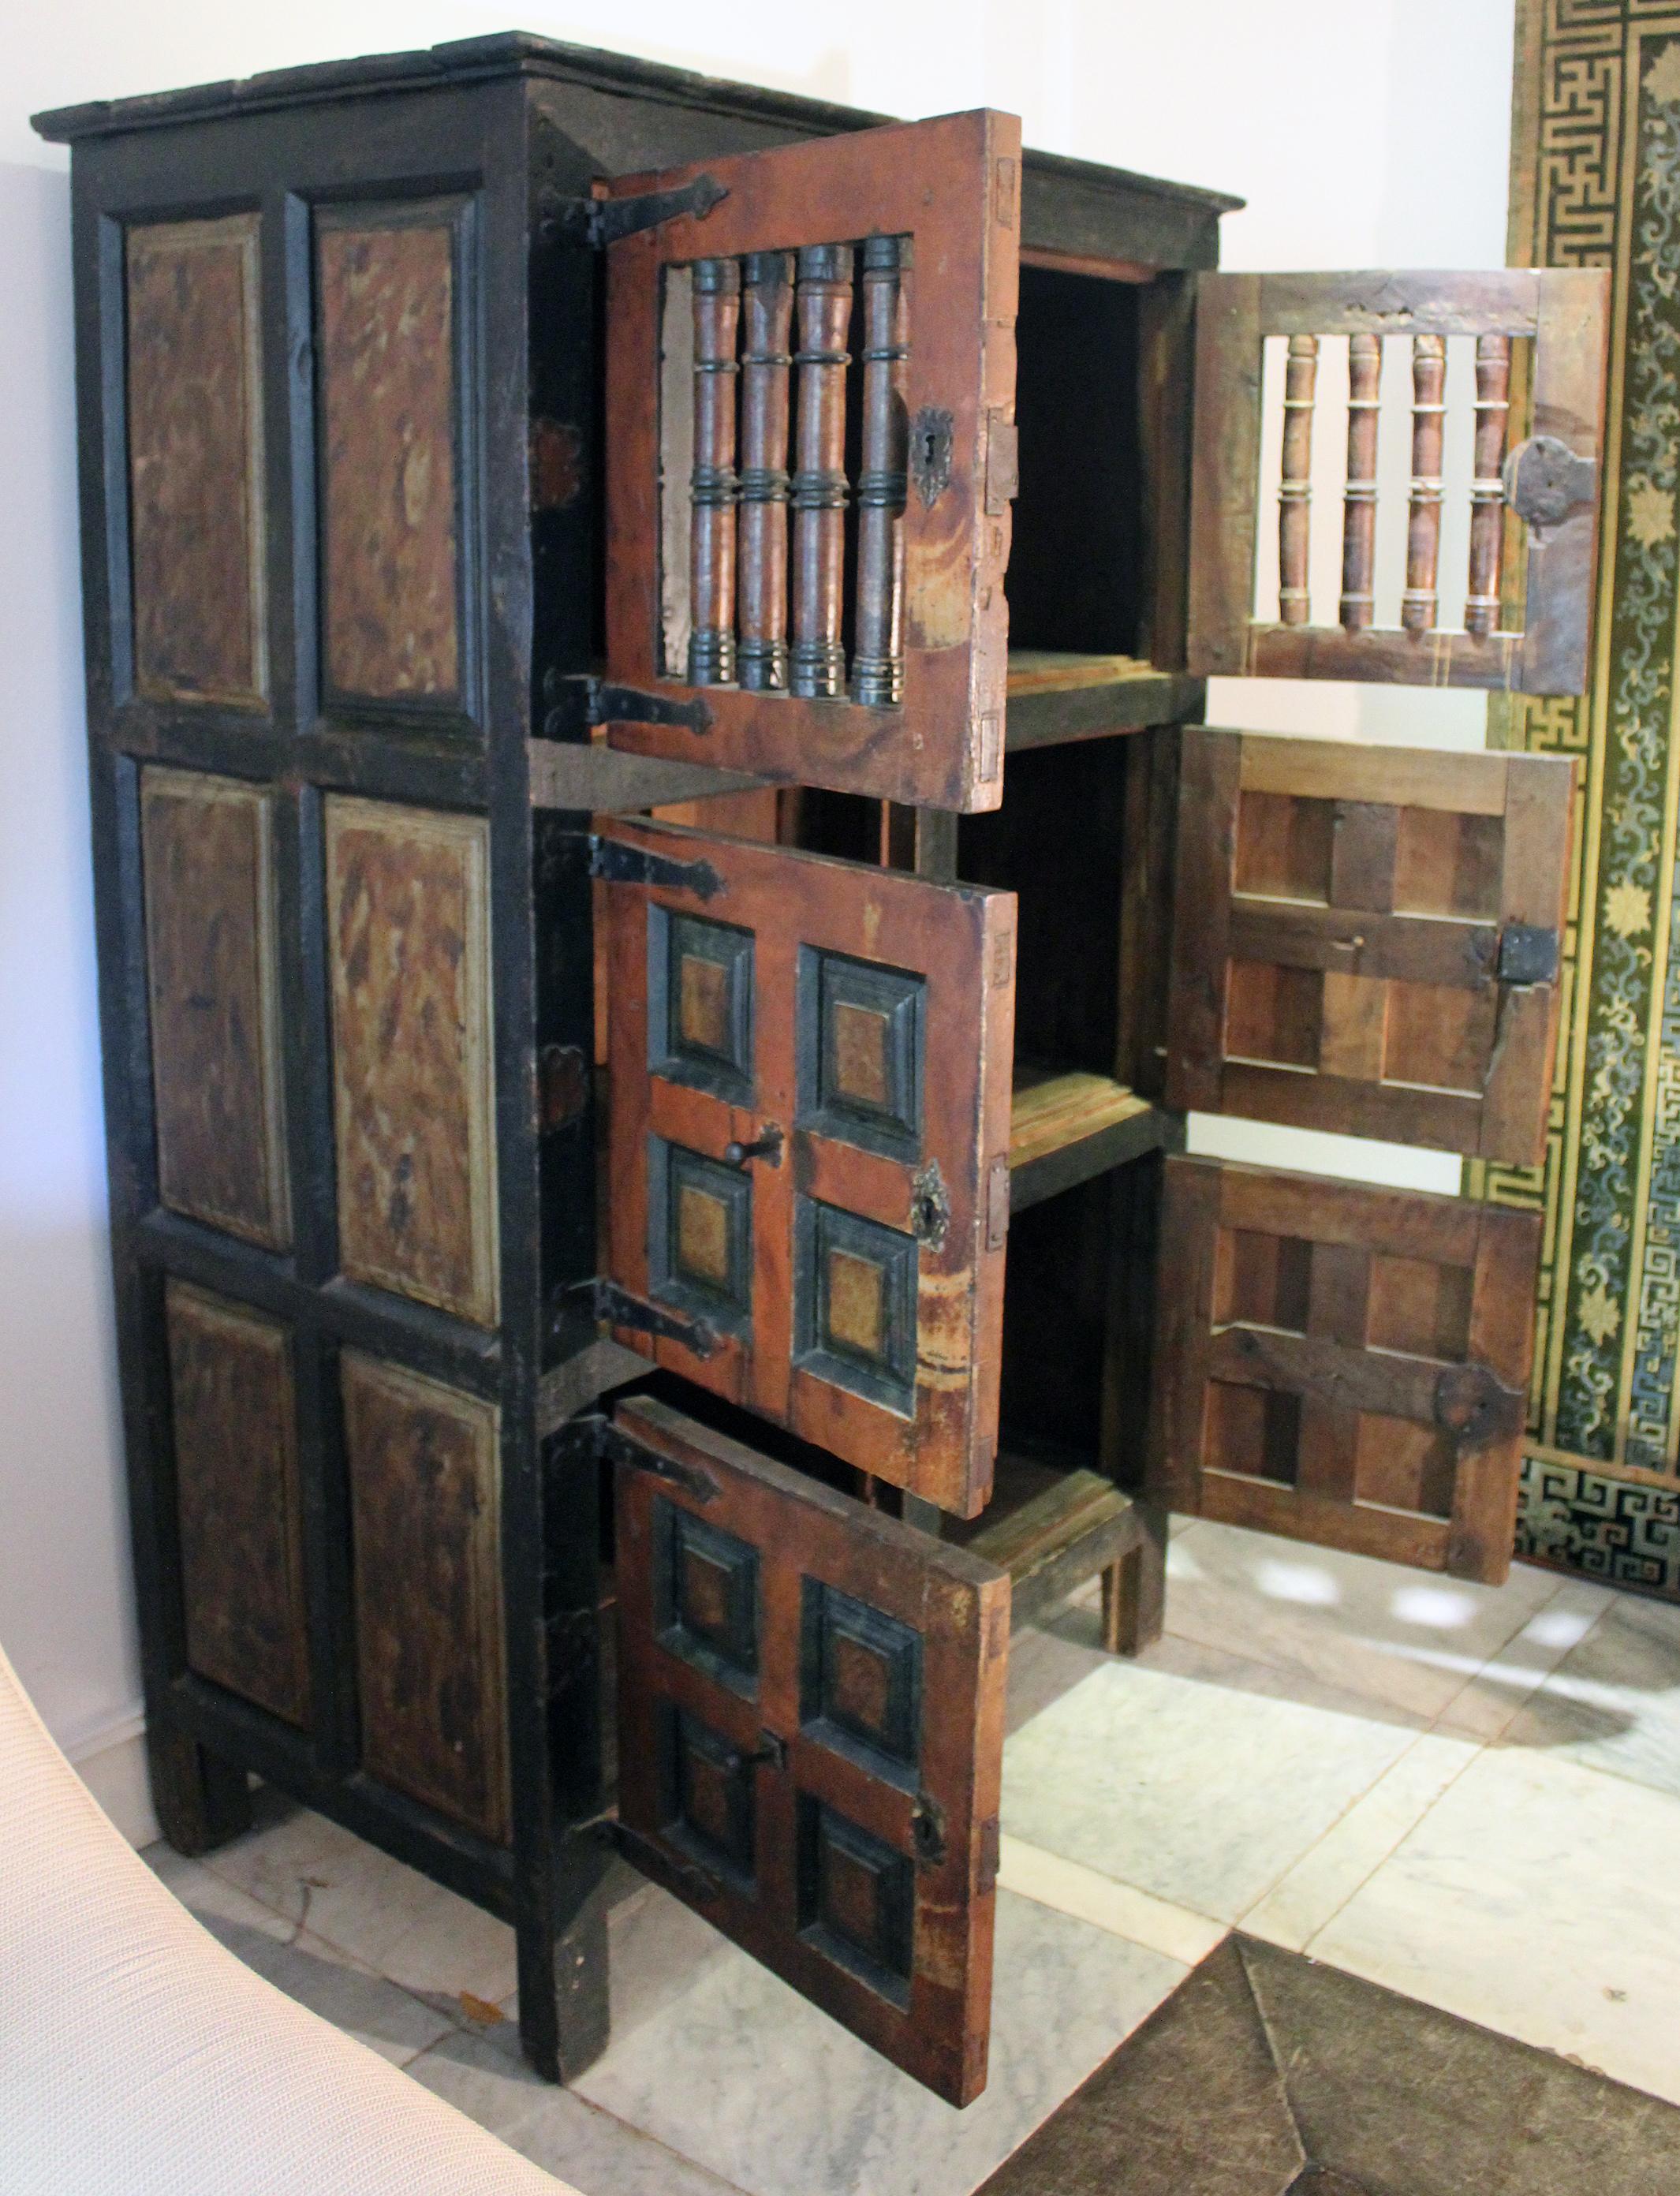 17th Century Spanish Painted Cabinet with Original Doors, Locks and Fittings (Holz)